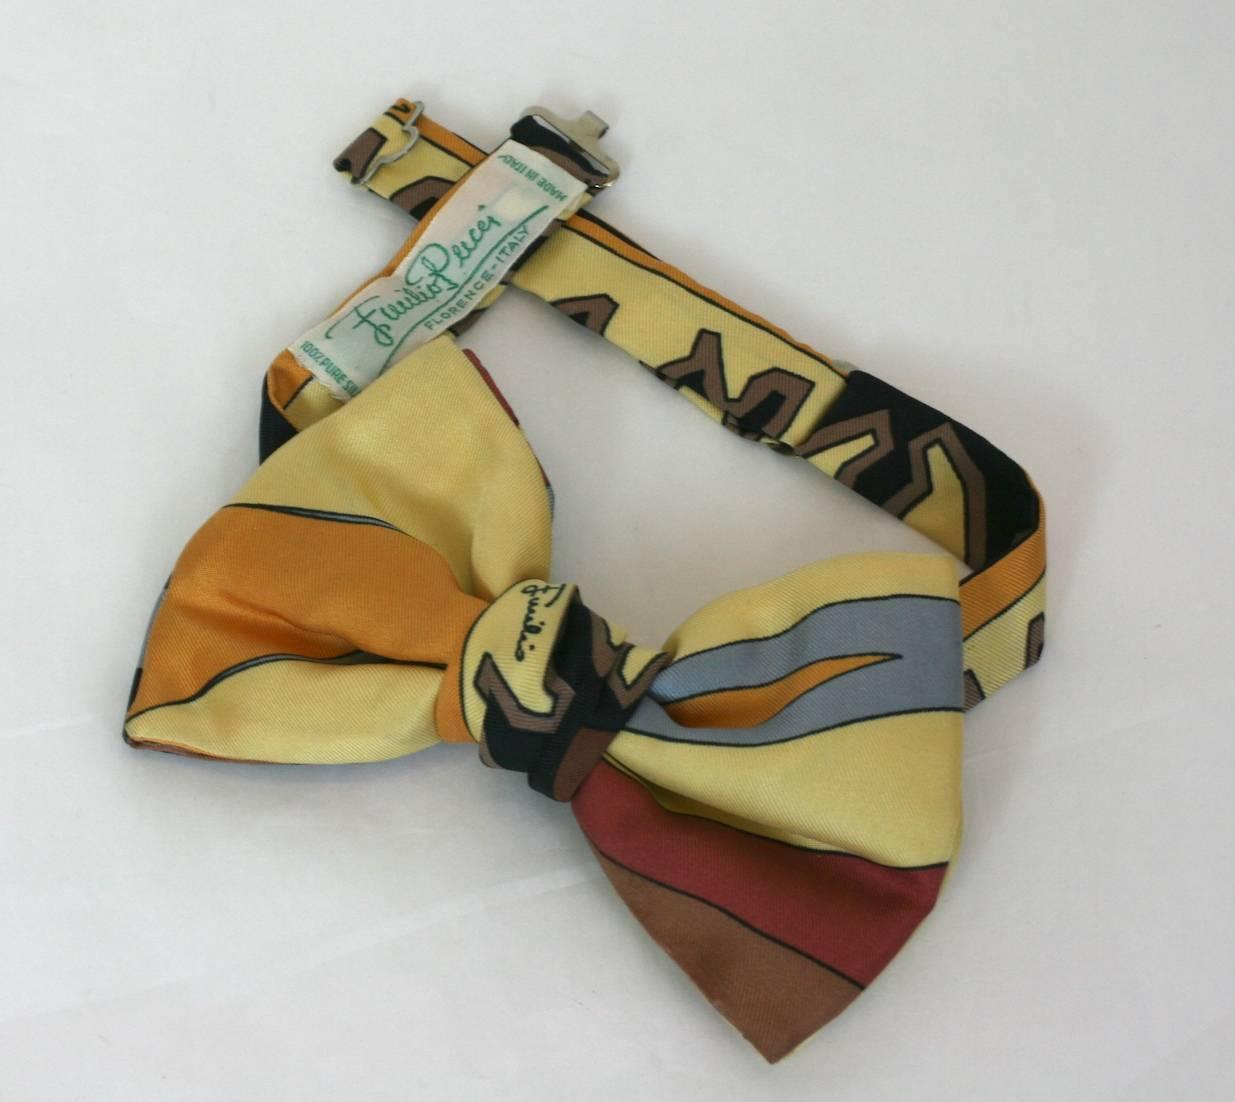 Emilio Pucci Silk Twill Bow tie from the 1970's. Signature Pucci graphics with adjustable neck strap. Suitable for men and women. 1970's Italy. Excellent condition. 5.5